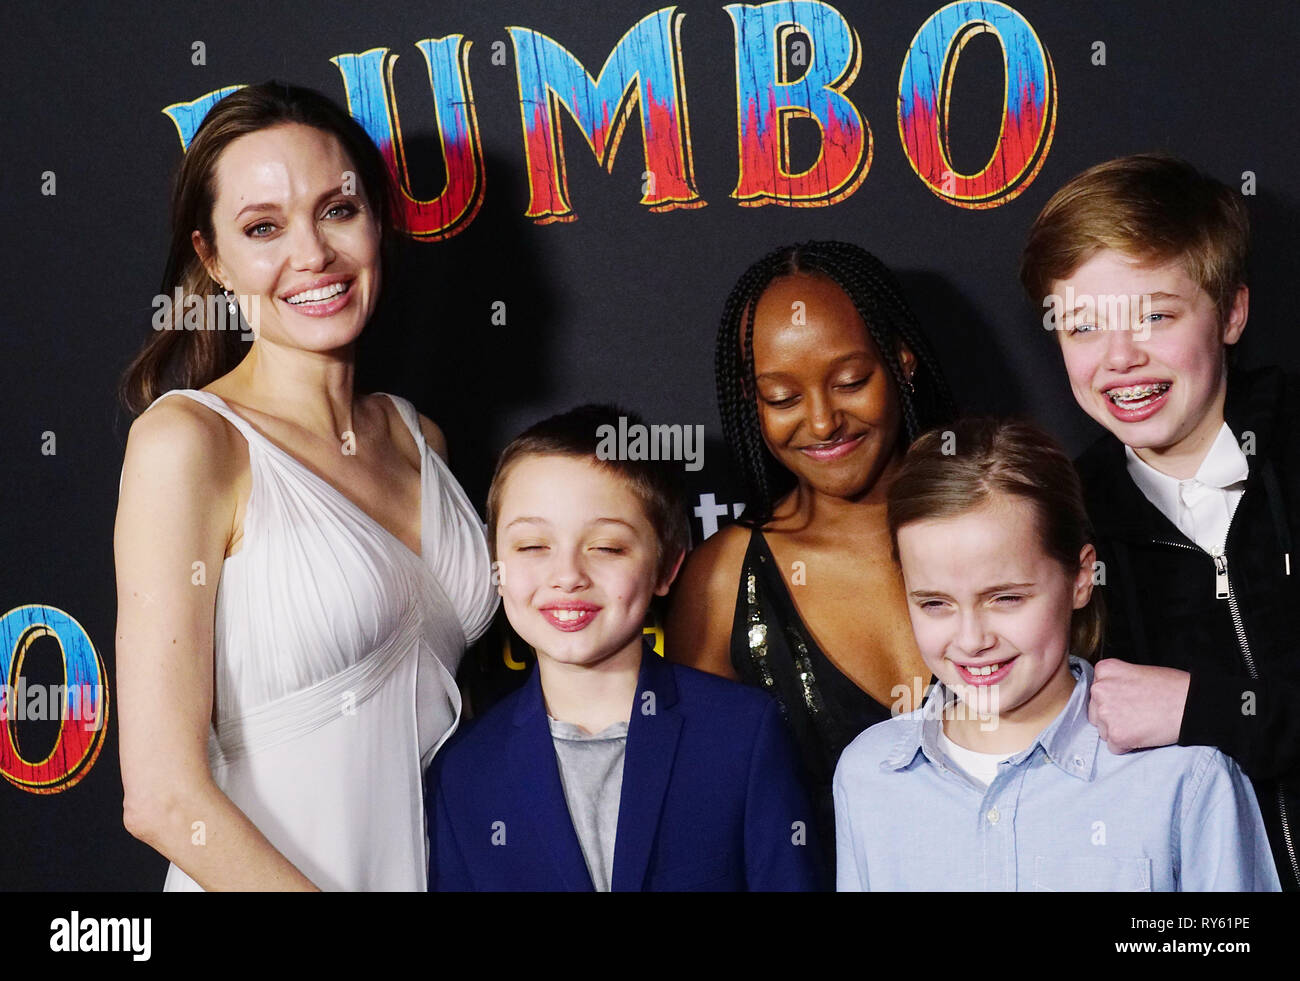 Hollywood, California, USA. 11th Mar, 2019. Angelina Jolie with her children Knox Jolie-Pitt and Zahara Marley Jolie-Pitt  028 attend the premiere of Disney s Dumbo at El Capitan Theatre on March 11, 2019 in Los Angeles, California. Credit: Tsuni / USA/Alamy Live News Stock Photo